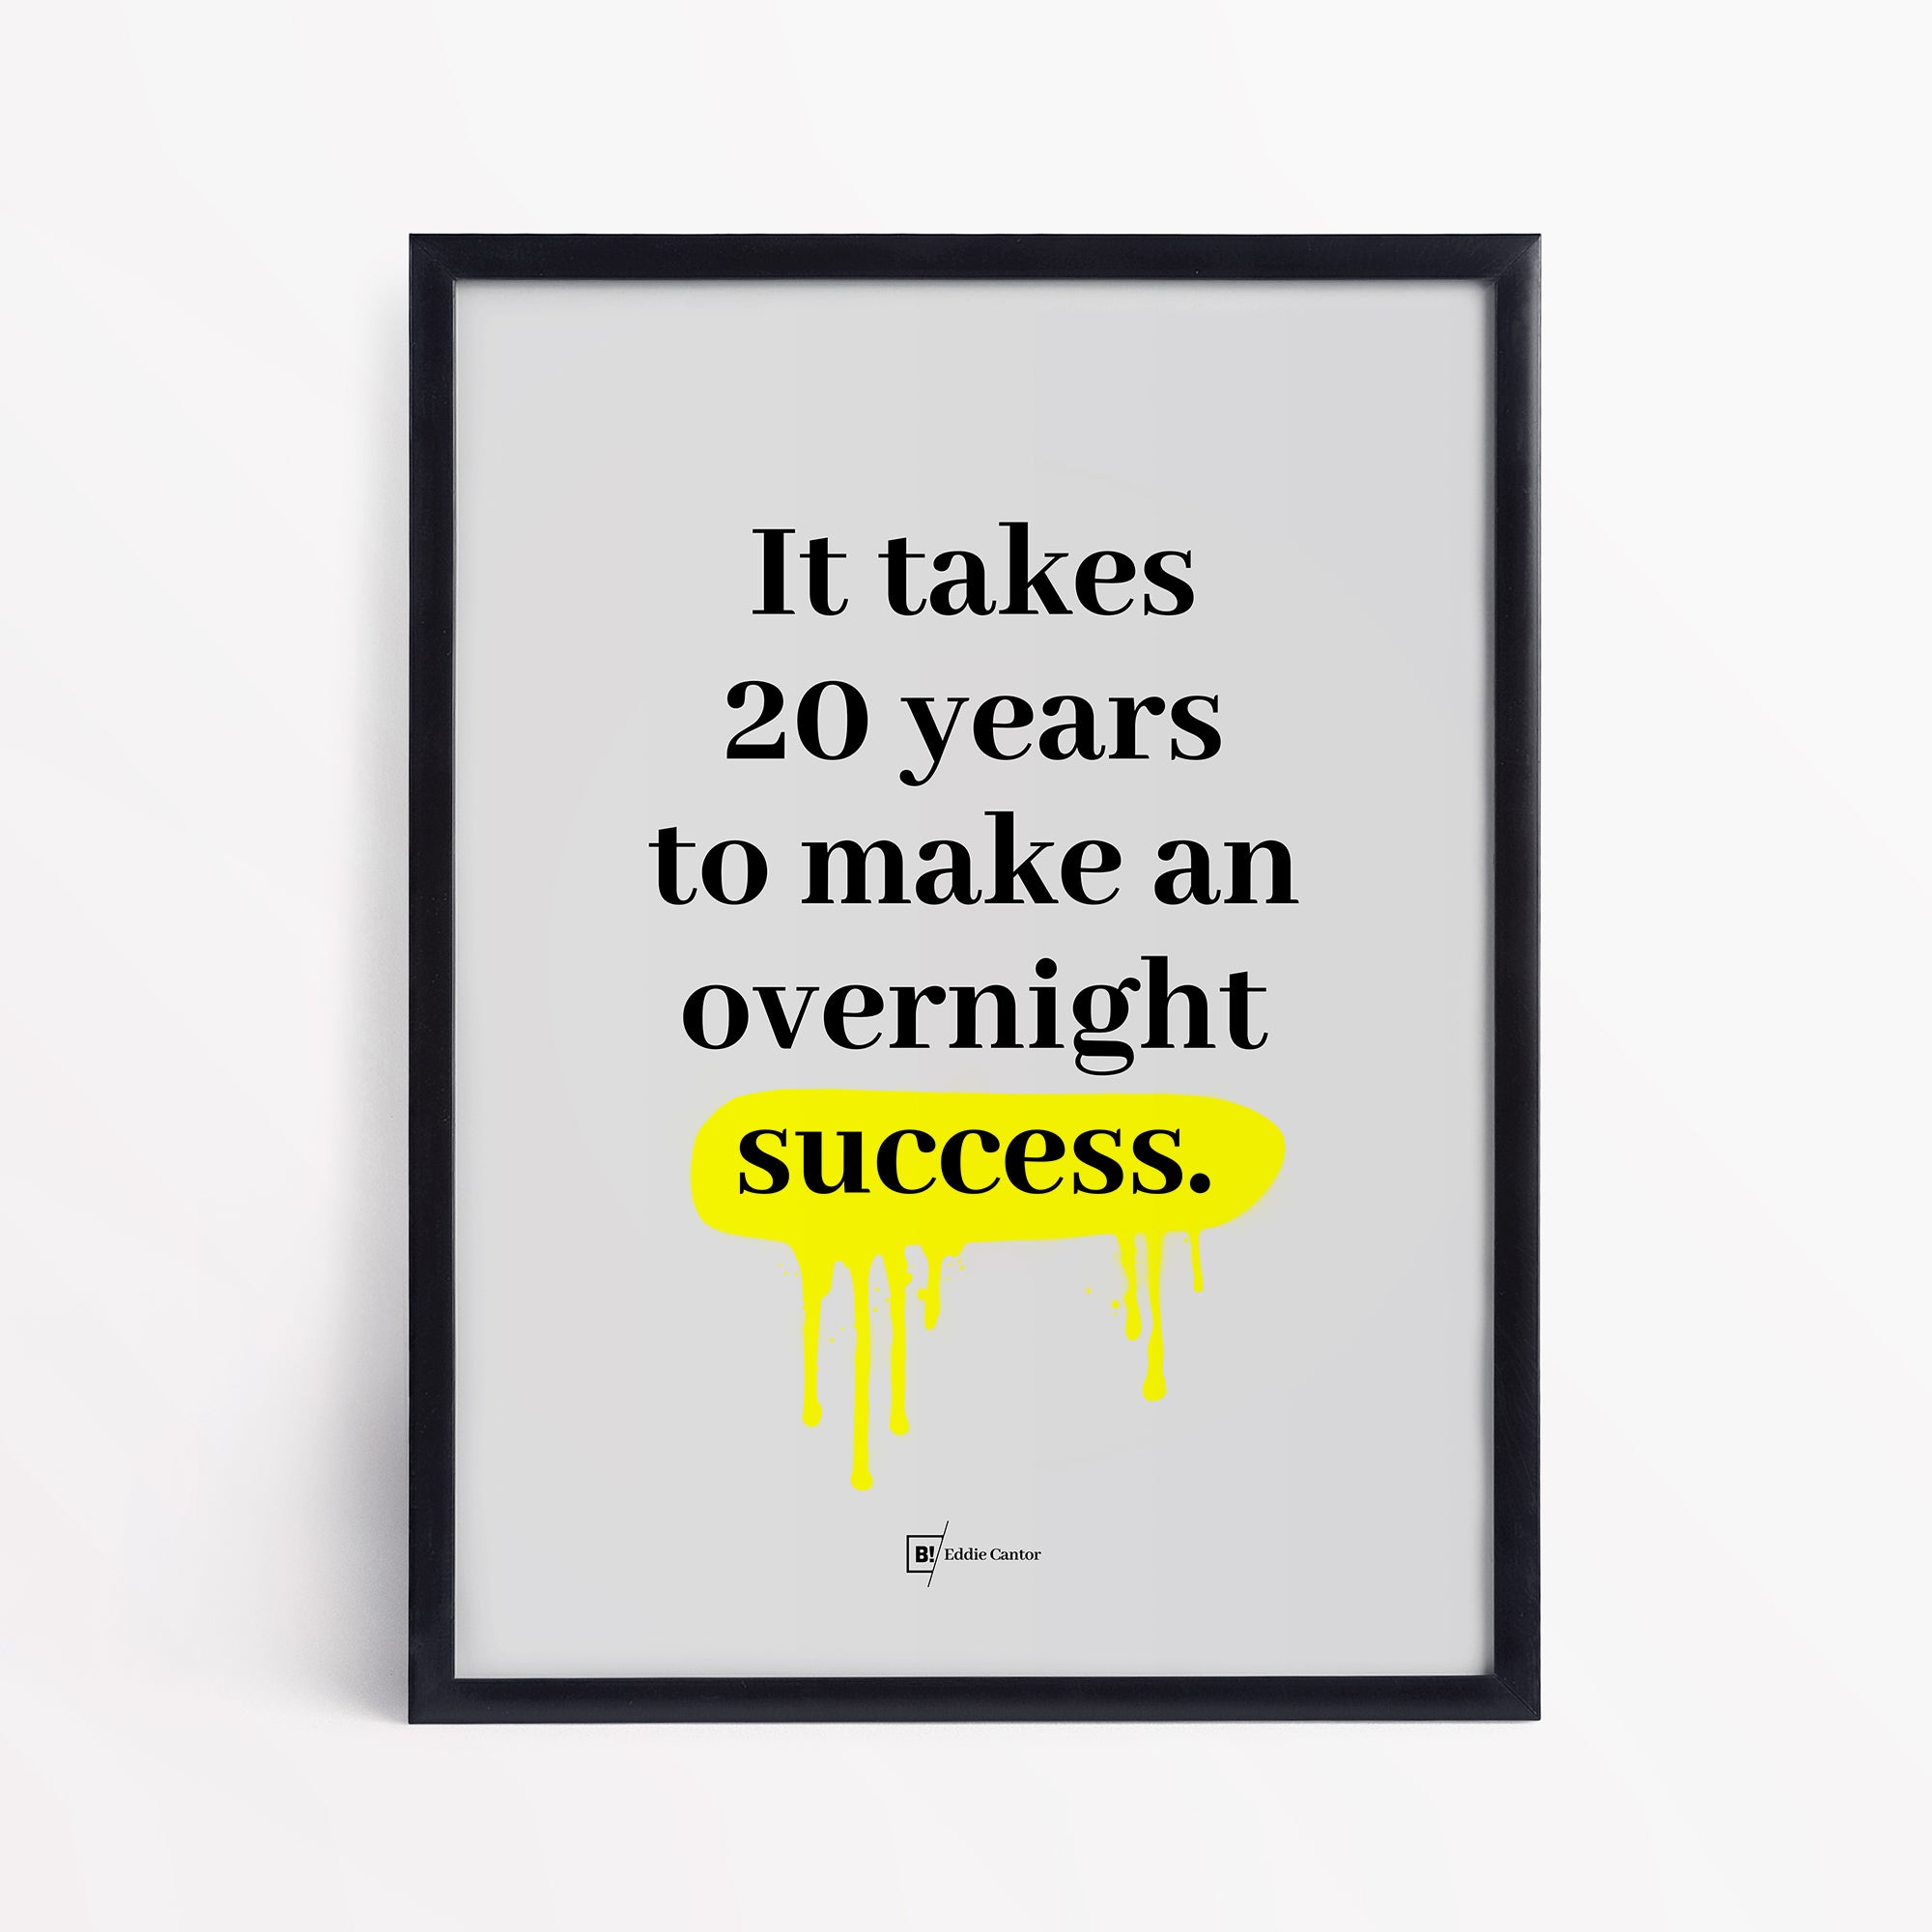 Be inspired by Eddie Cantor's famous "It takes 20 years to make an overnight success" quote art print. This artwork was printed using the giclée process on archival acid-free paper and is presented in a simple black frame that captures its timeless beauty in every detail.